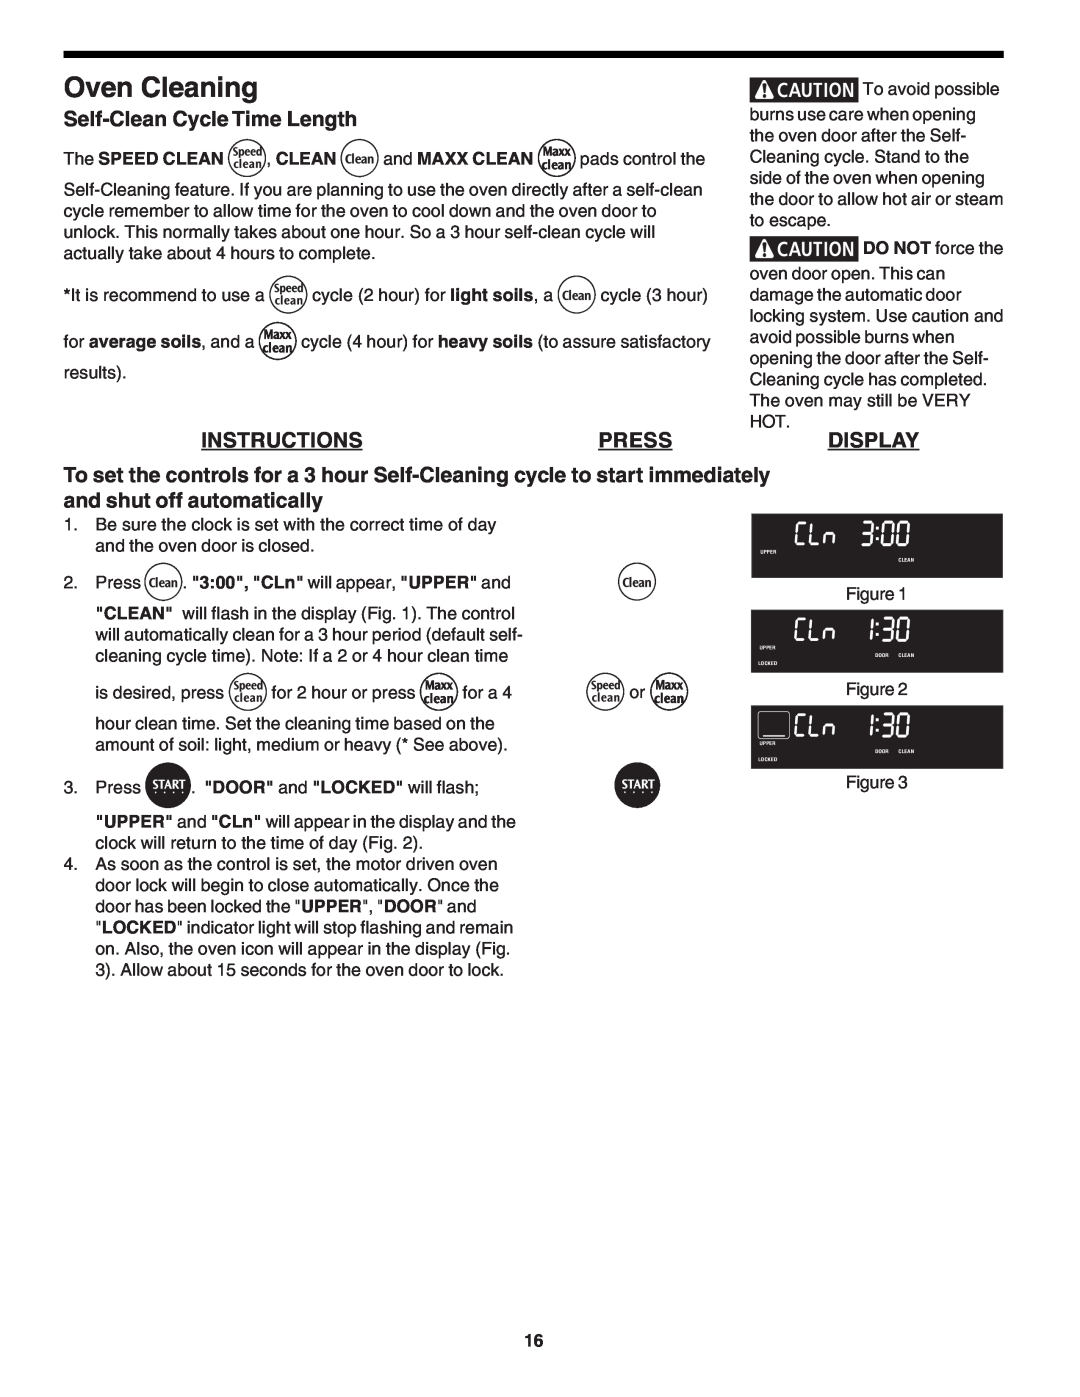 Frigidaire 318200138 (0610) manual Oven Cleaning, Self-CleanCycle Time Length, Instructions, Press, Display 